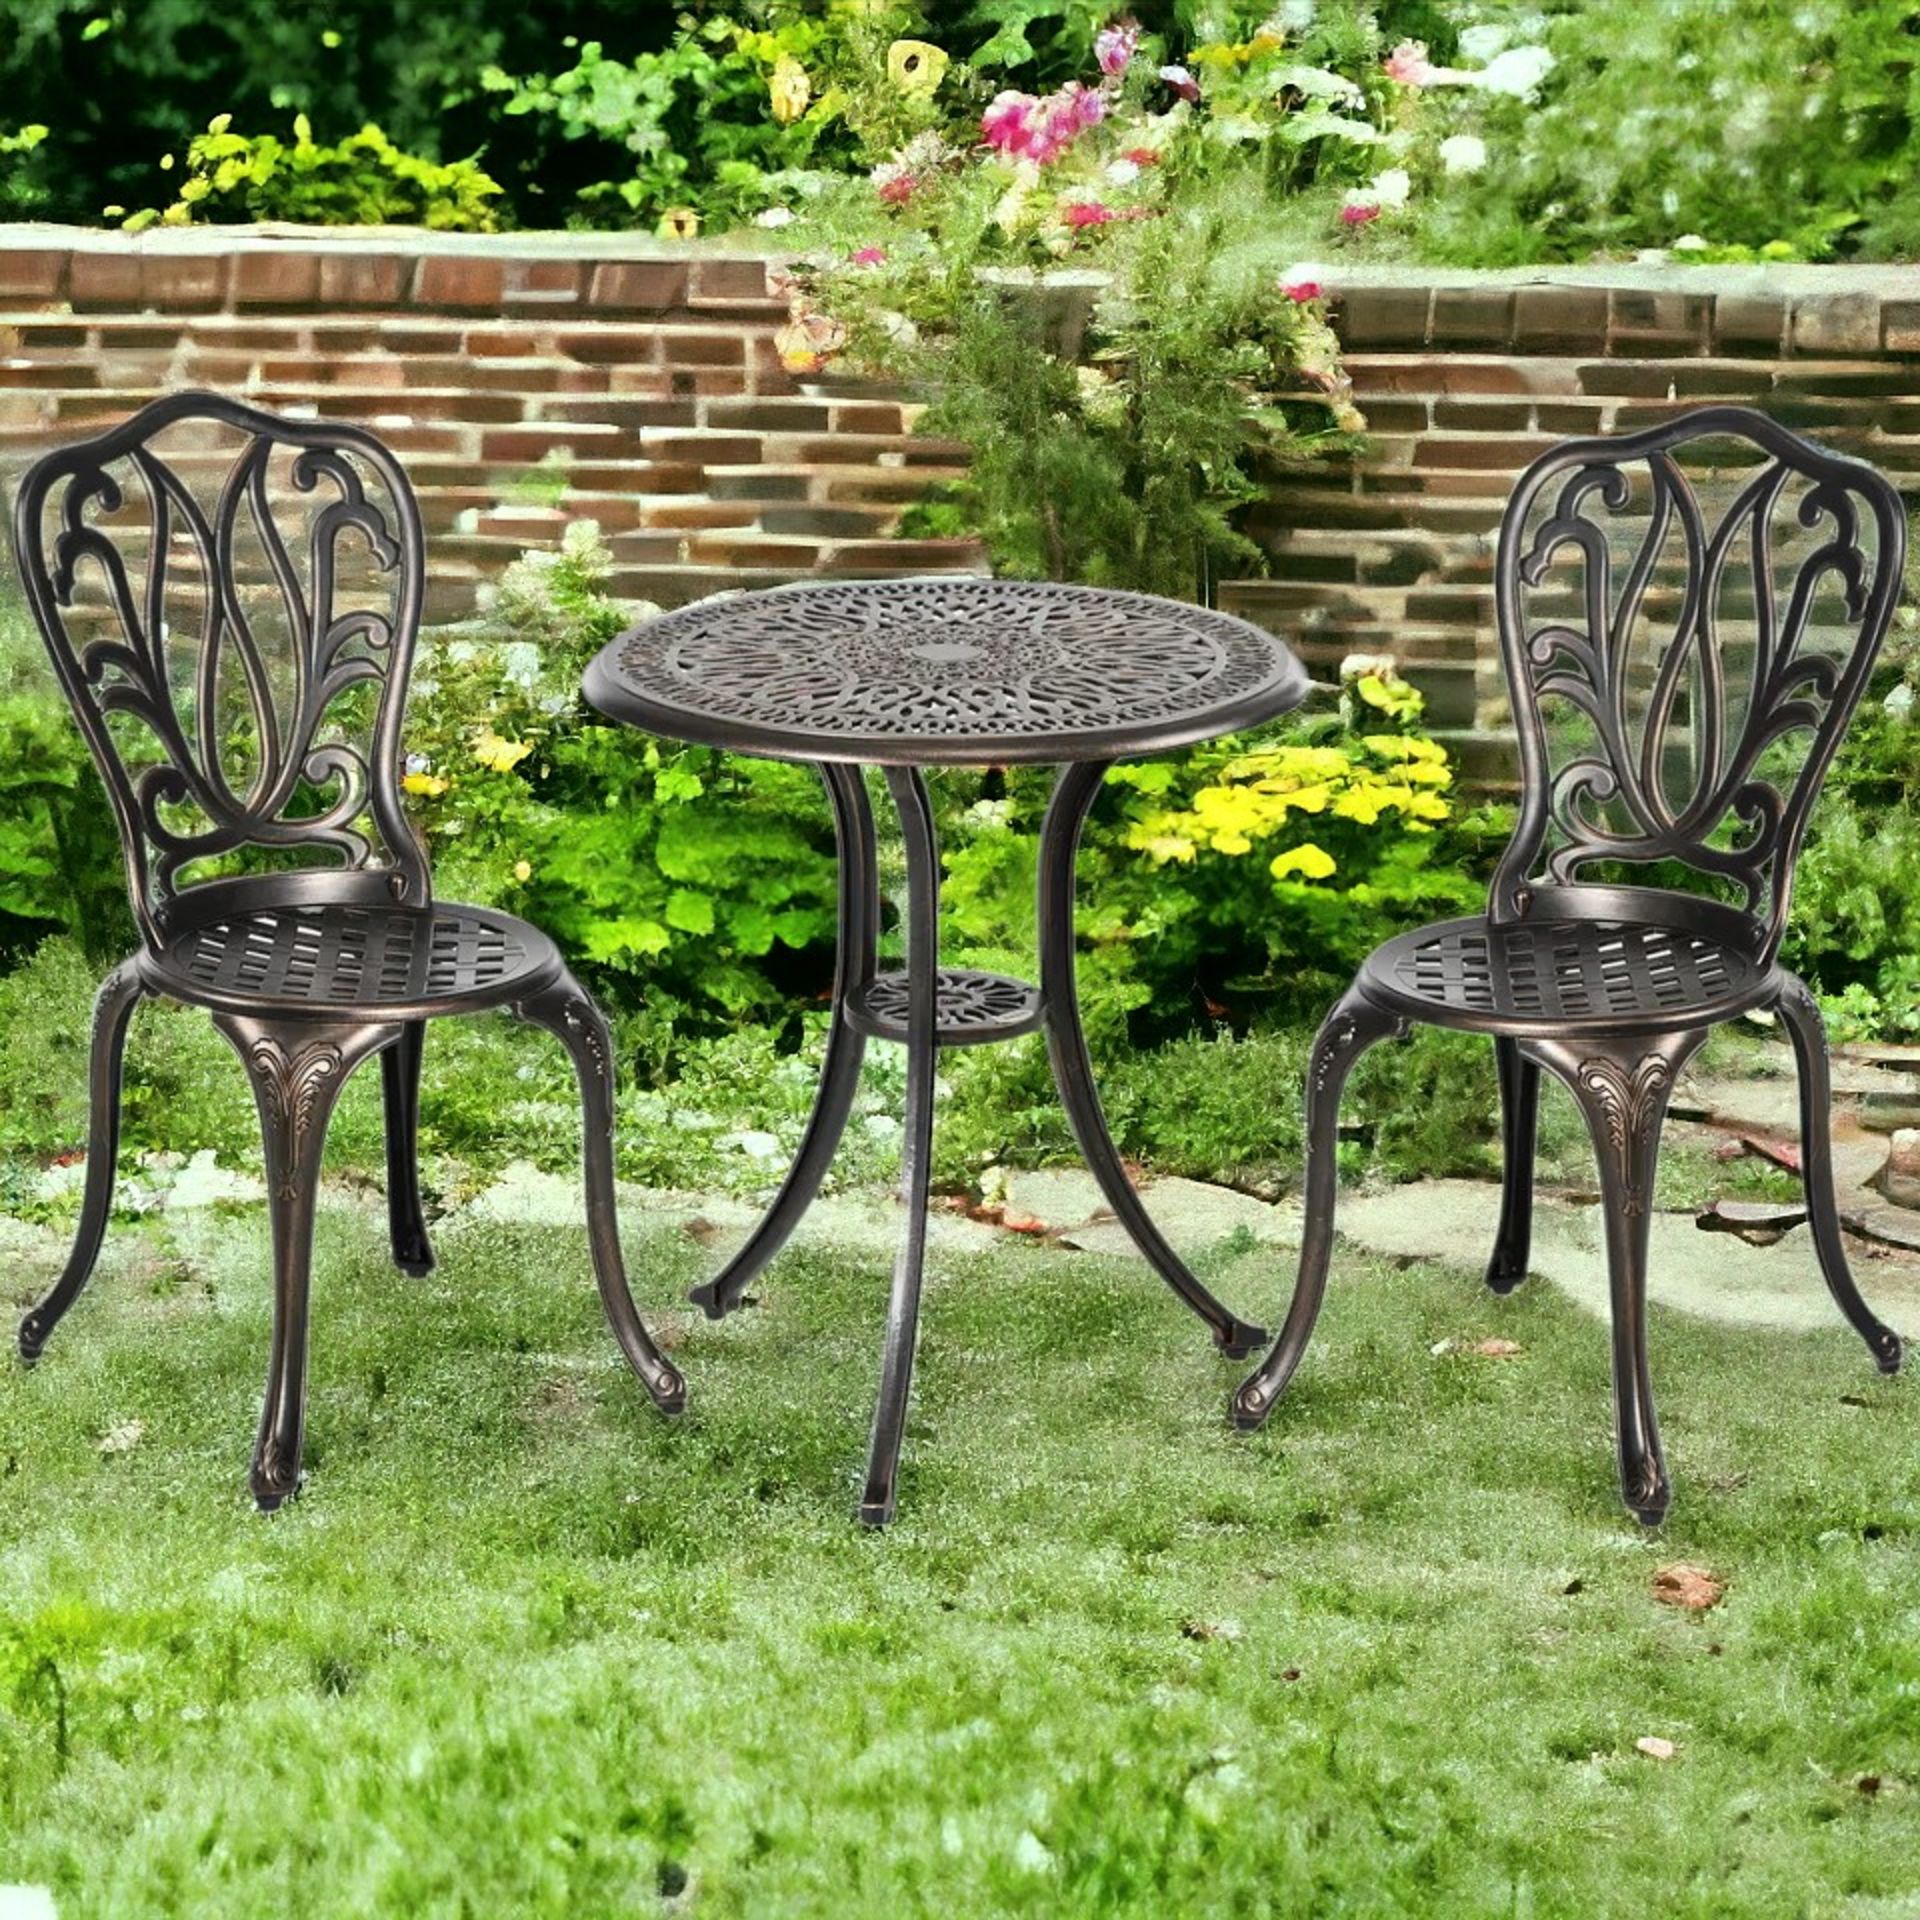 FREE DELIVERY -BRAND NEW 3 PIECE PATIO BISTRO SET OUTDOOR TABLE SET WITH UMBRELLA HOLE BRONZE